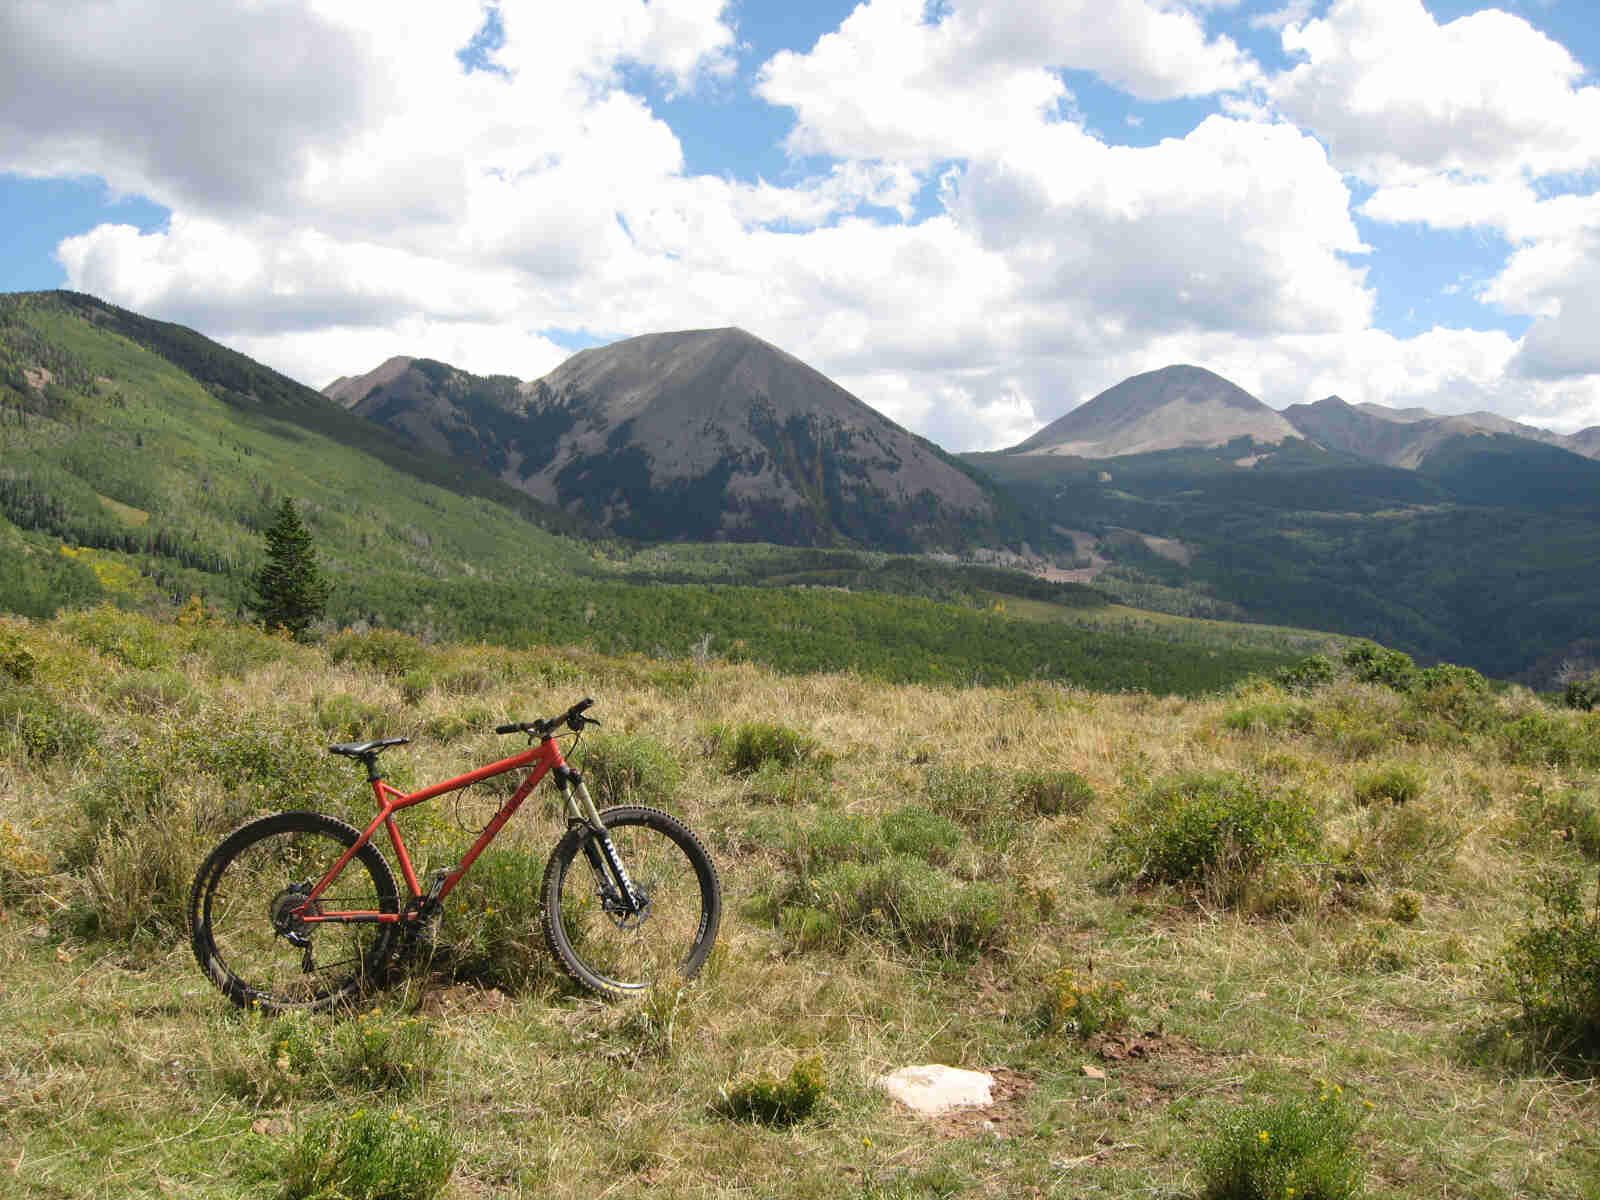 Right side view of a red Surly Instigator bike, on a grass field with small bushes, and mountains in the background